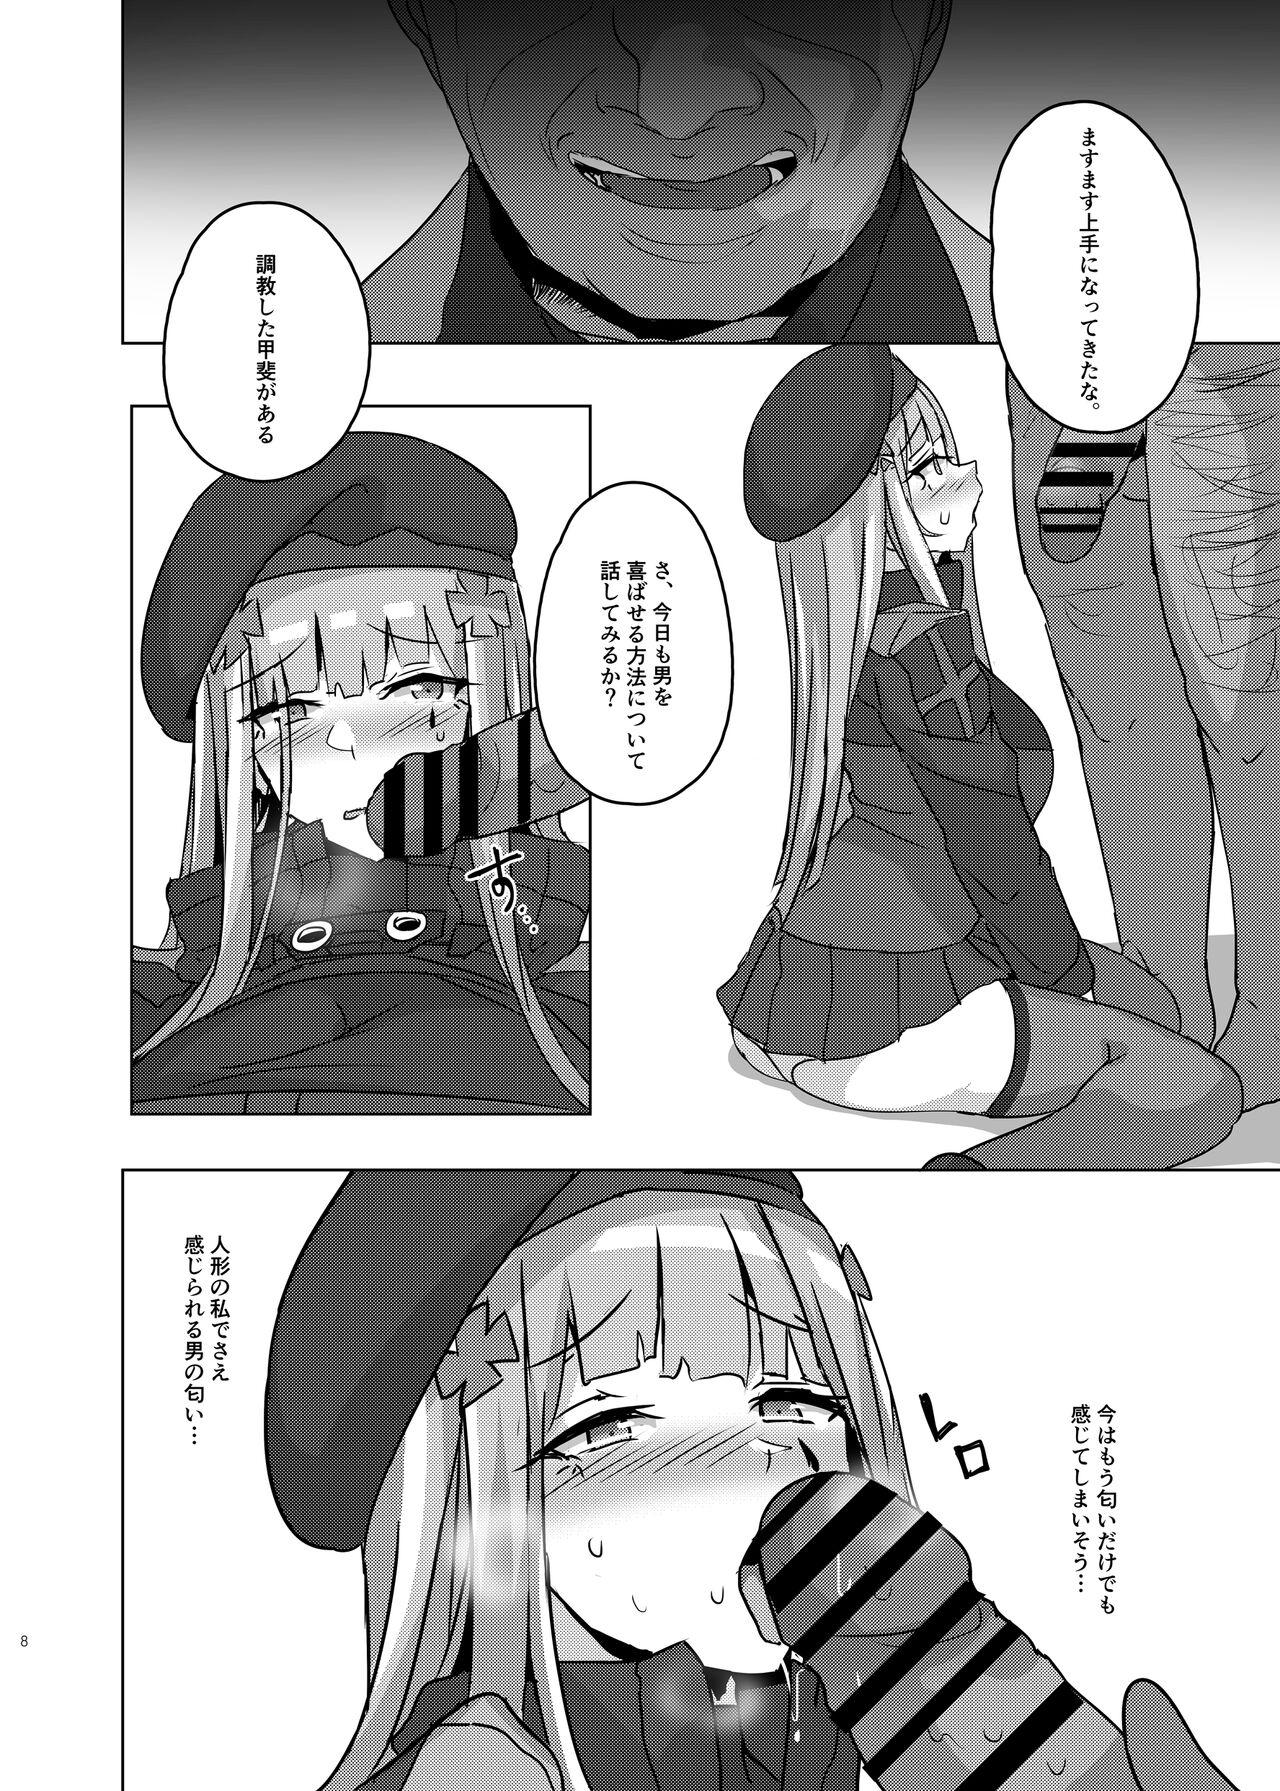 Ass 万能ま○こ416ちゃん - Girls frontline Face - Page 7